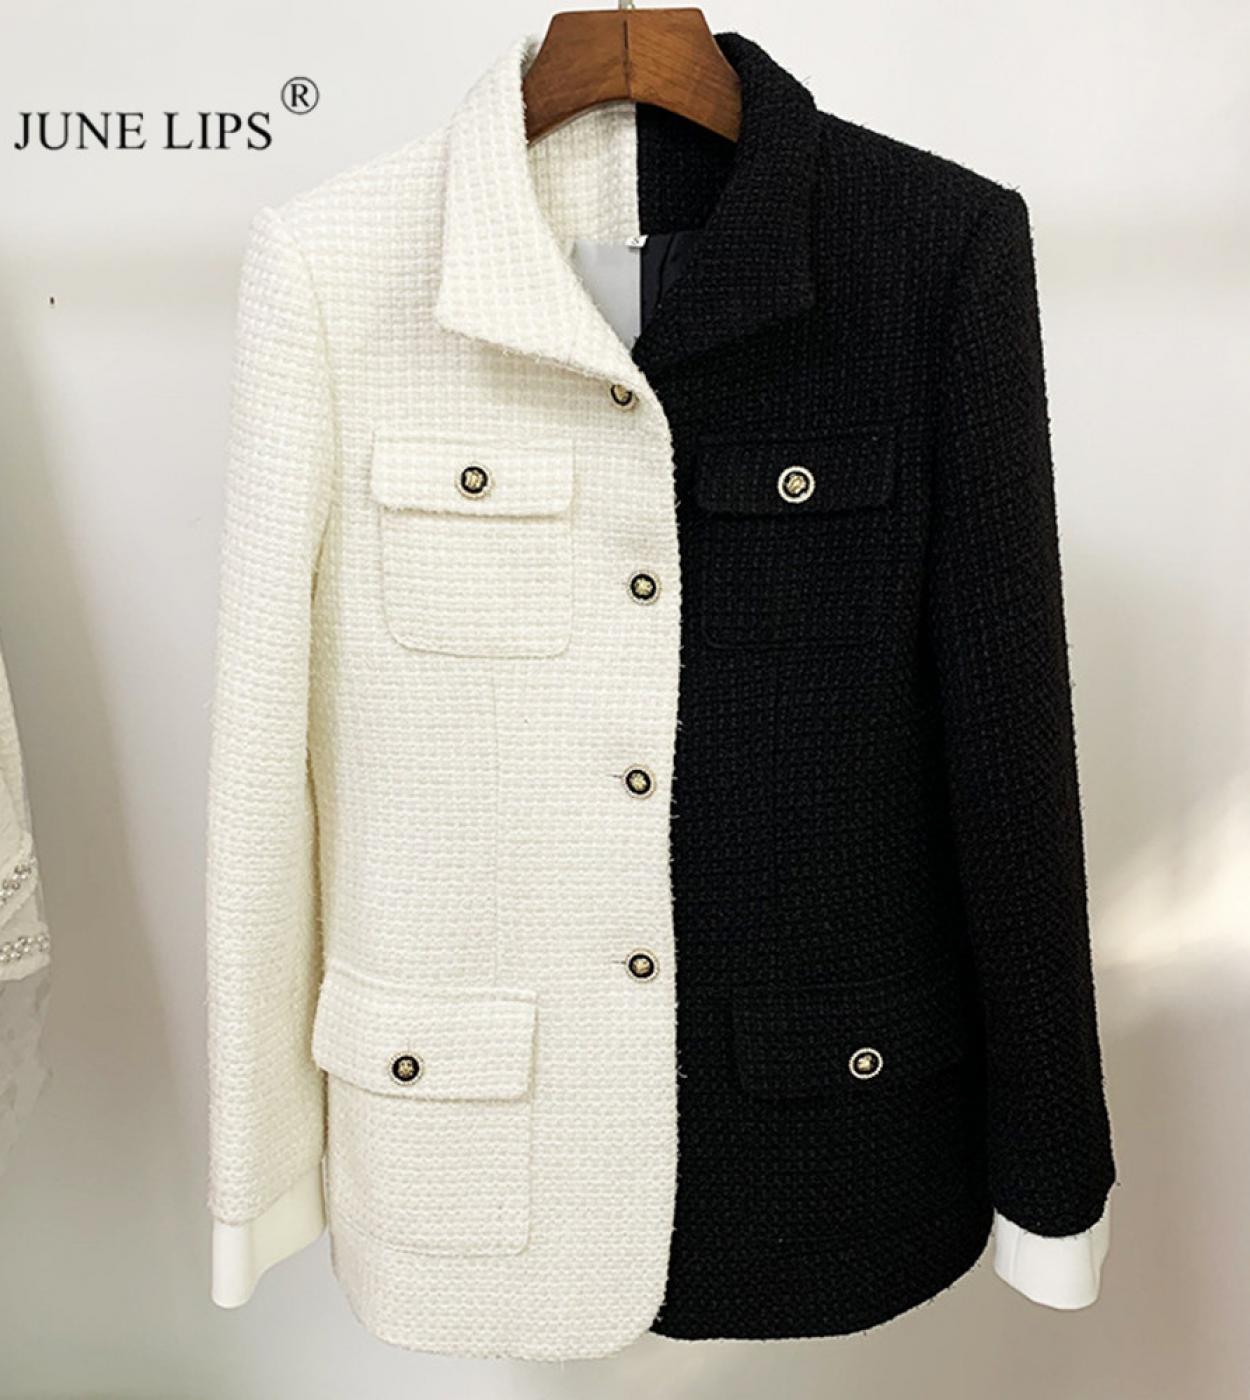 June  Lips Autumn And Winter 2022 Fabric New Star Fashion Small Perfume Jacket Personalized Color Comparison Wool Jacket